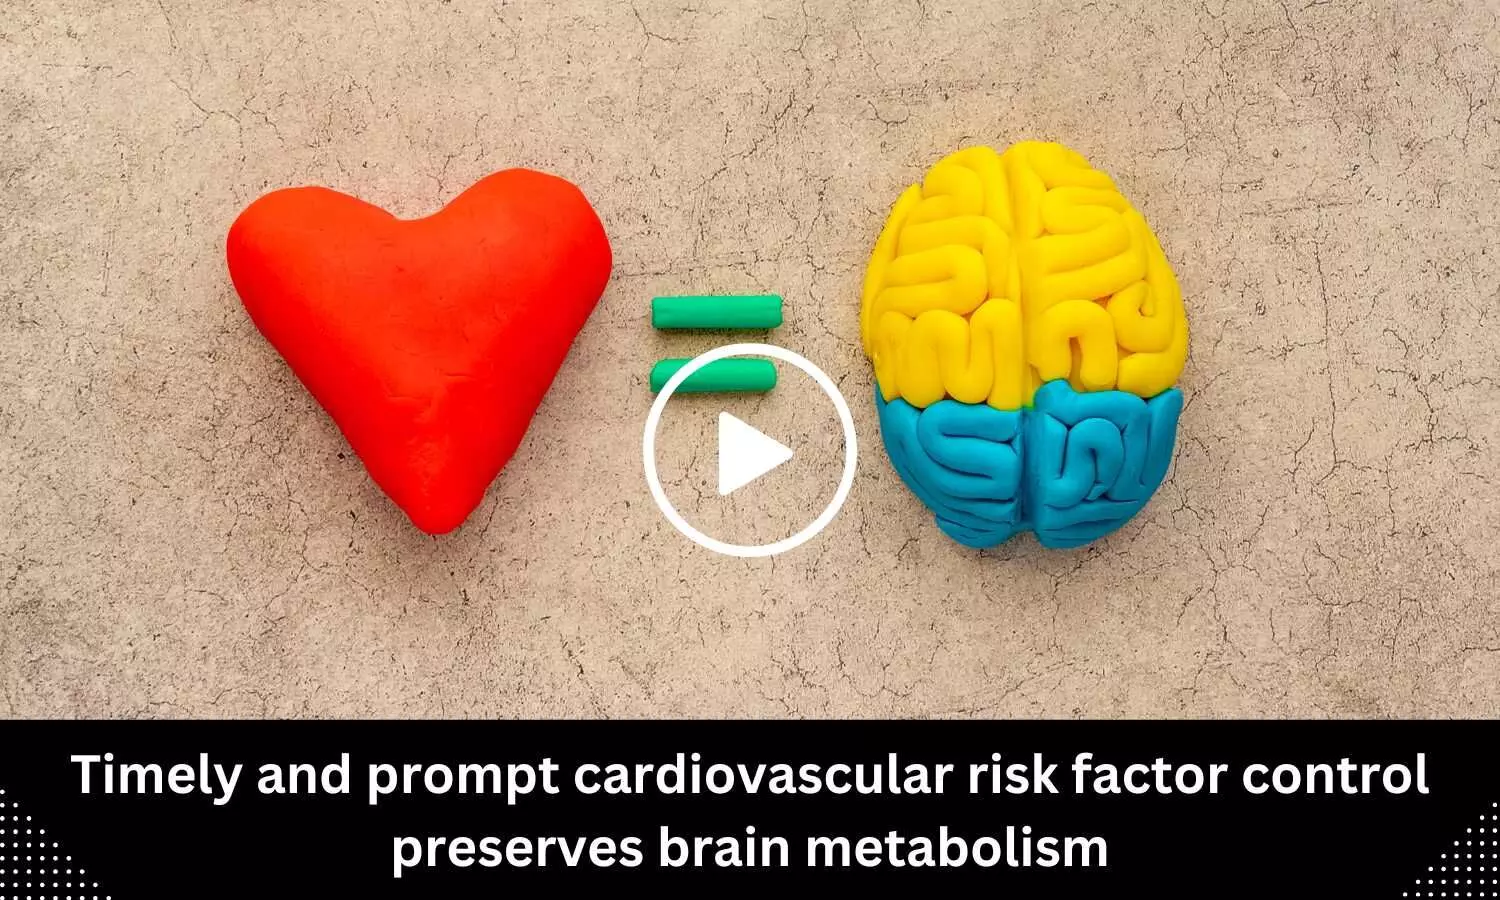 Timely and prompt cardiovascular risk factor control preserves brain metabolism